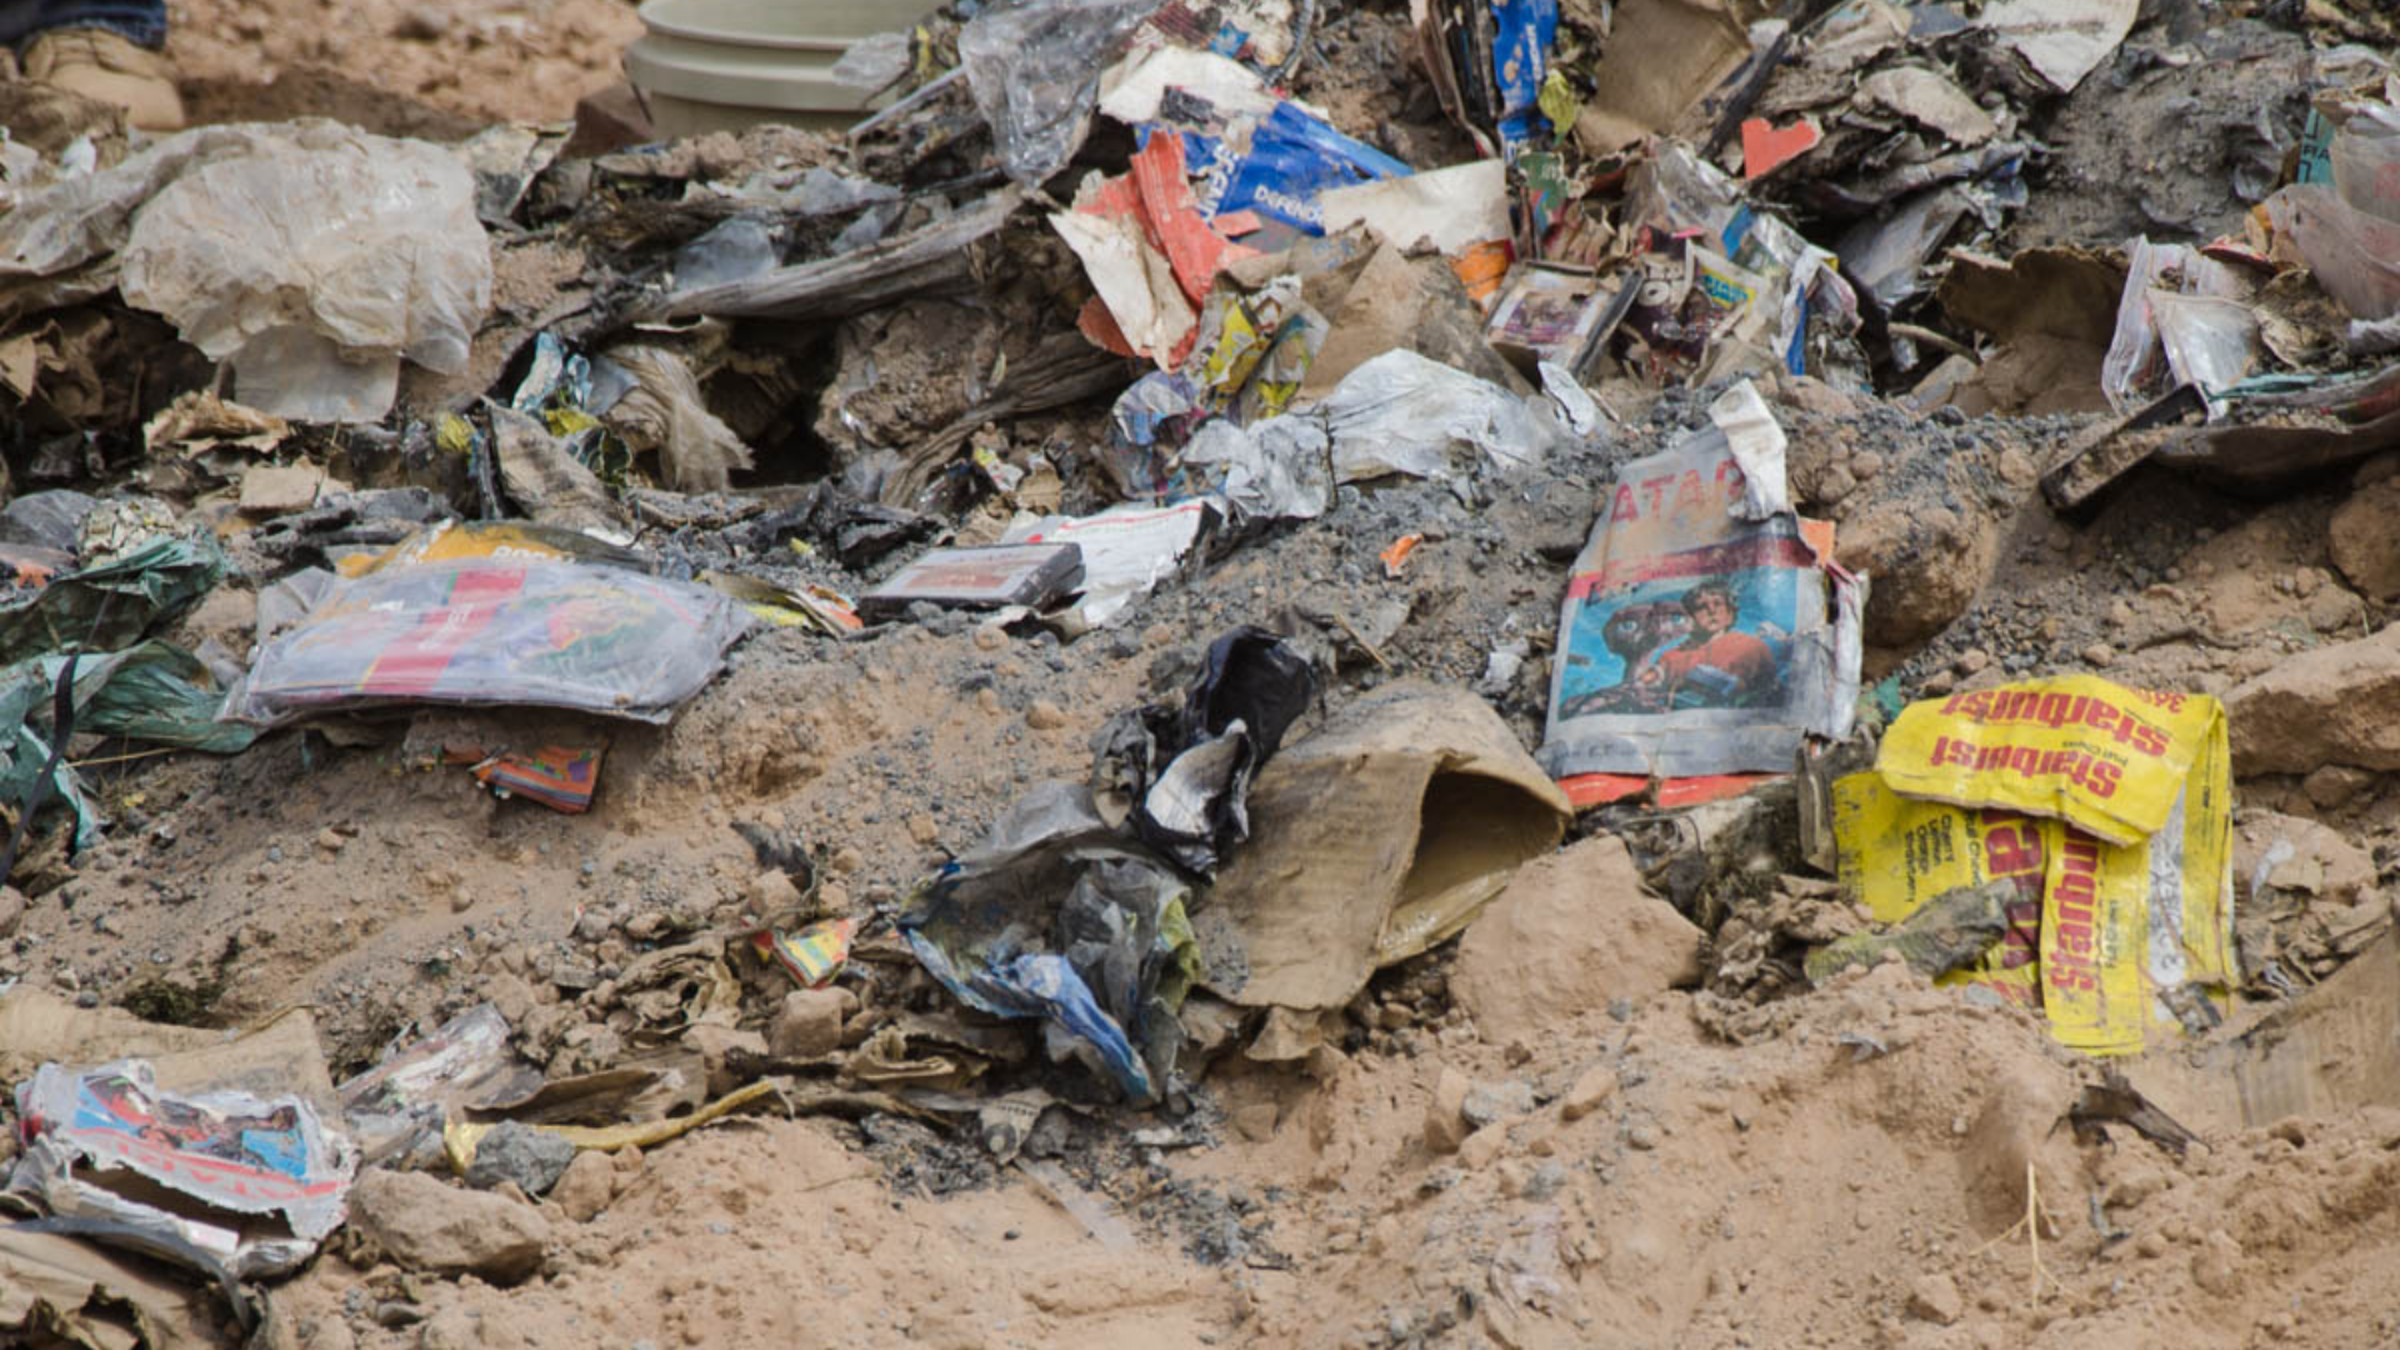 Photo of the infamous Atari video game landfill burial featuring numerous Atari video game boxes half buried in a landfill in New Mexico